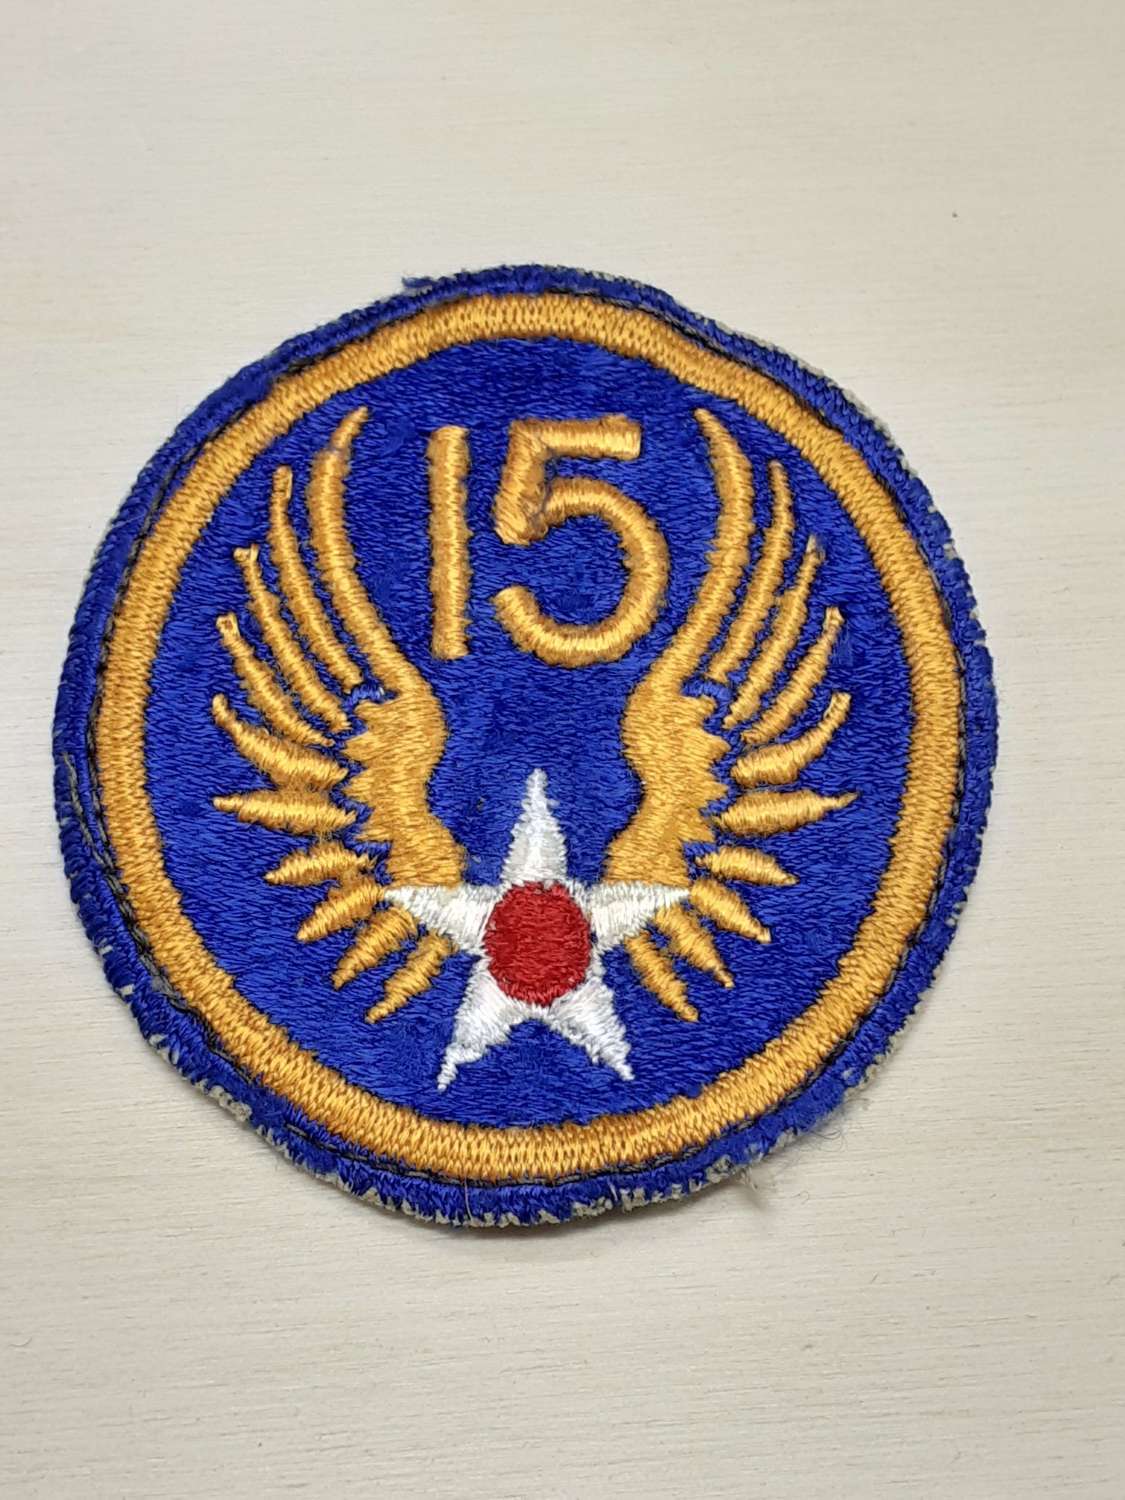 US 15th Air Force Patch